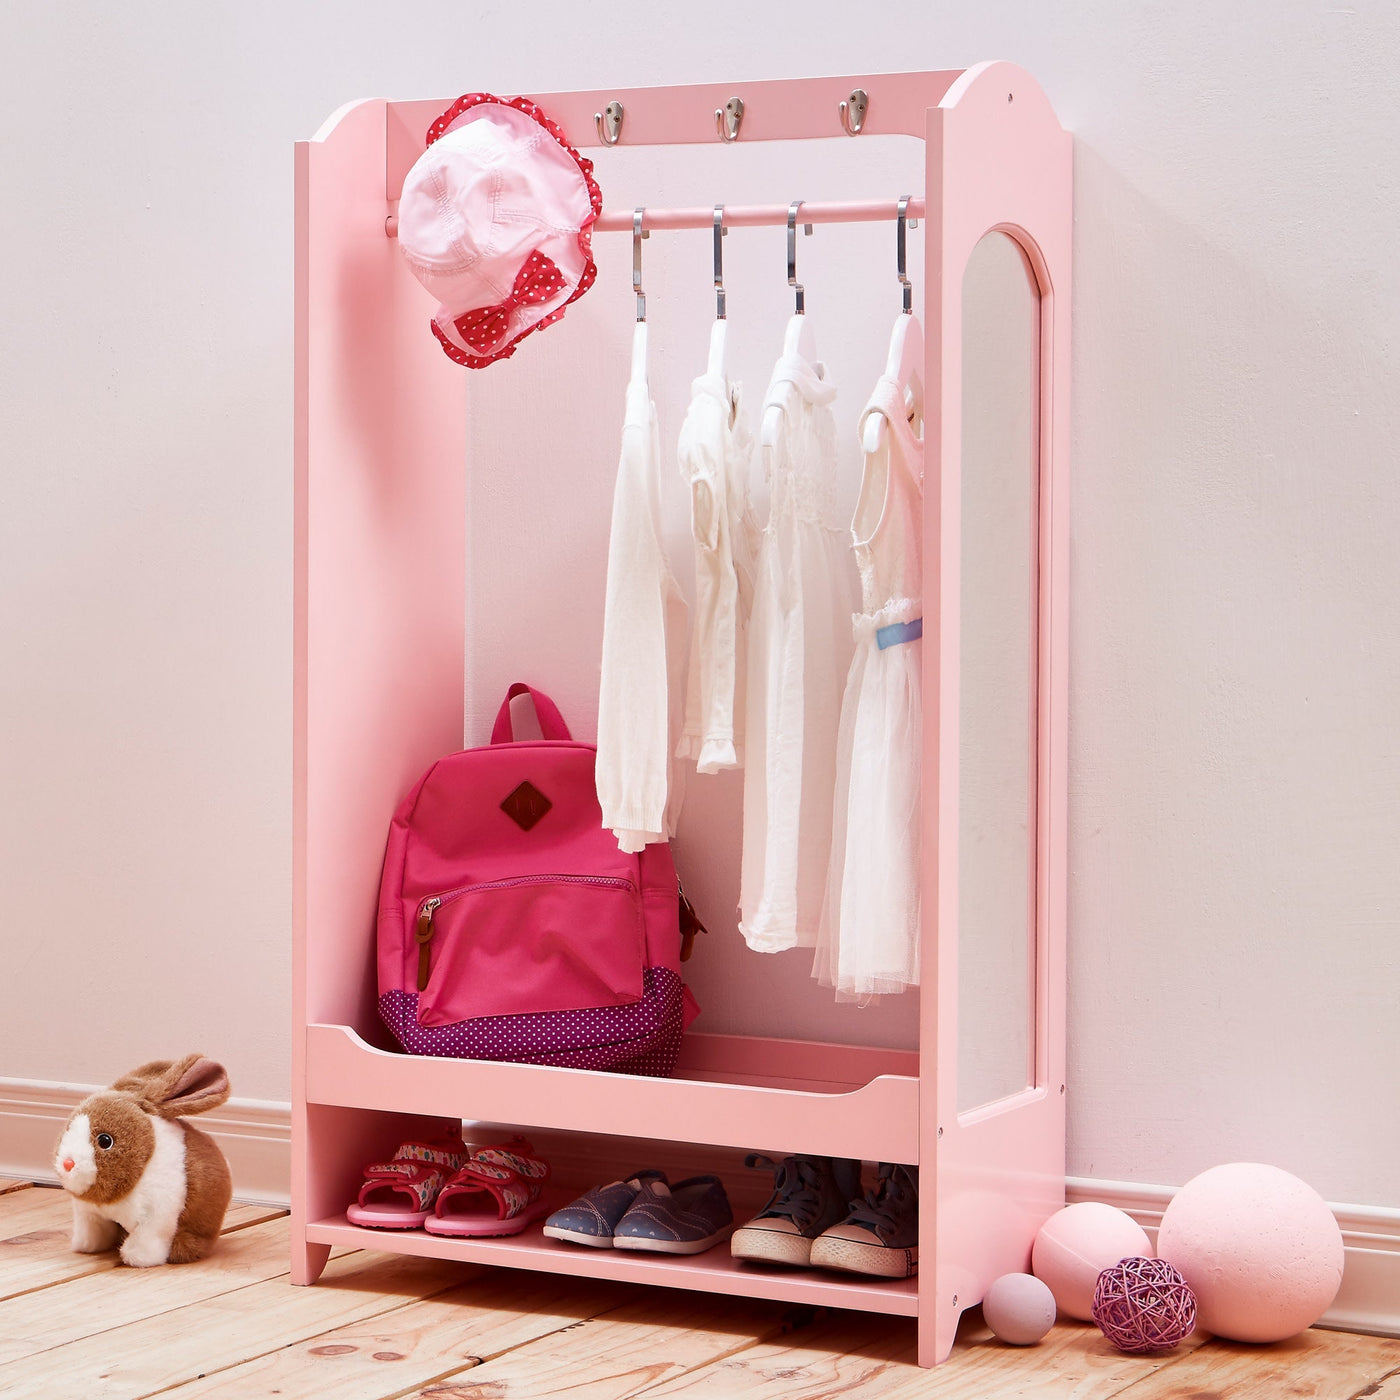 Fantasy Fields Little Princess Clothing Rack with Storage and 4 Hangers, Pink